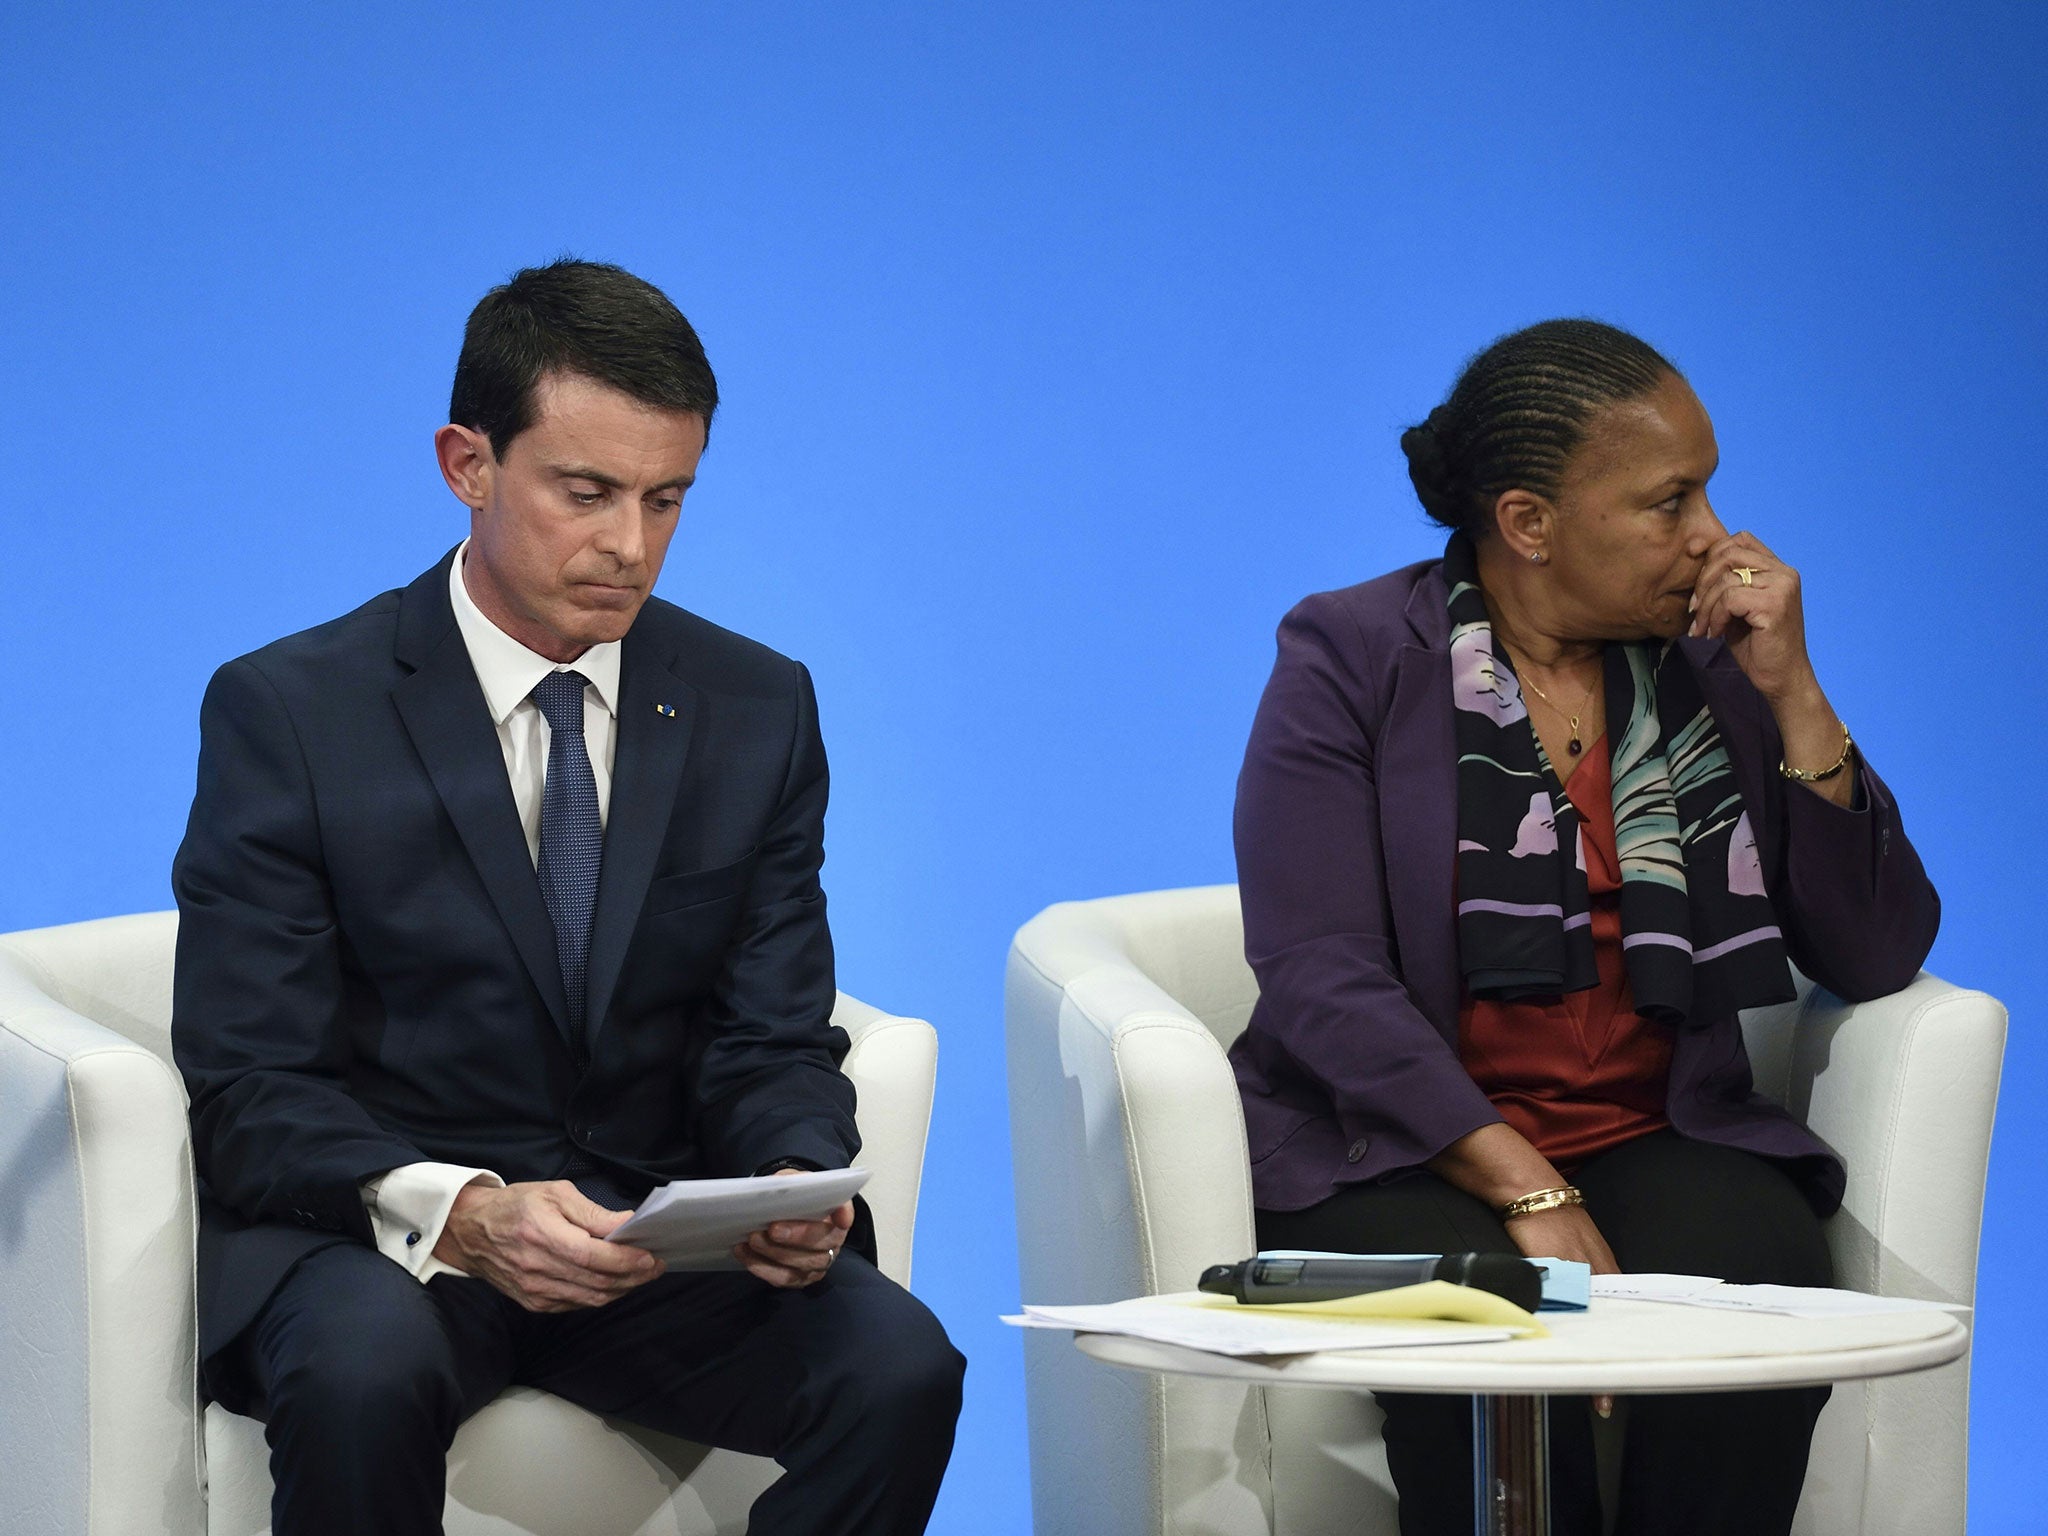 Leftist justice minister Christiane Taubira (right) has clashed with the more centre-leaning French Prime Minister Manuel Valls